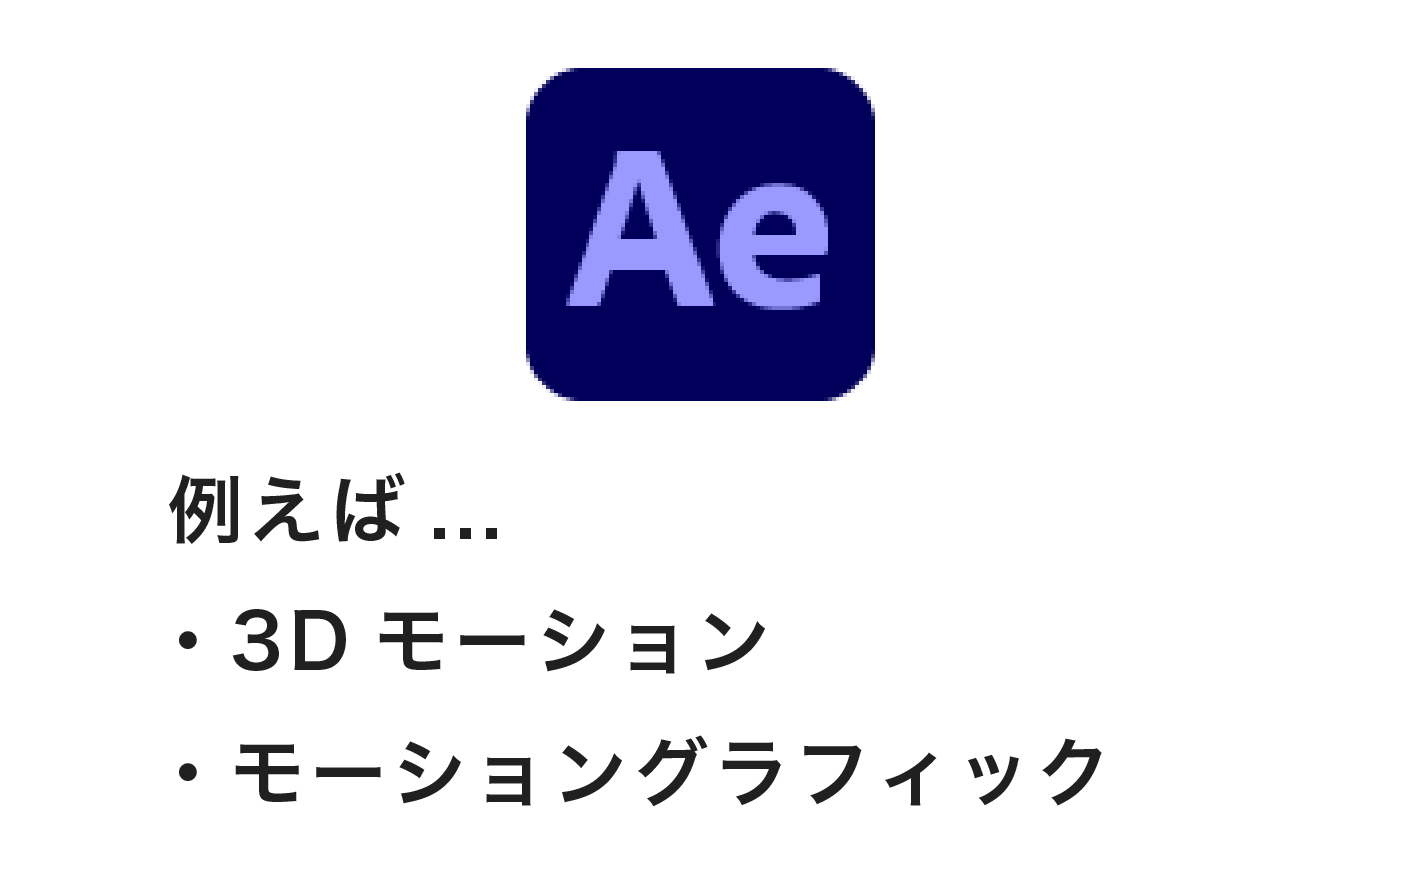 Epace(いーぺーす)ではAfter Effects学習可能